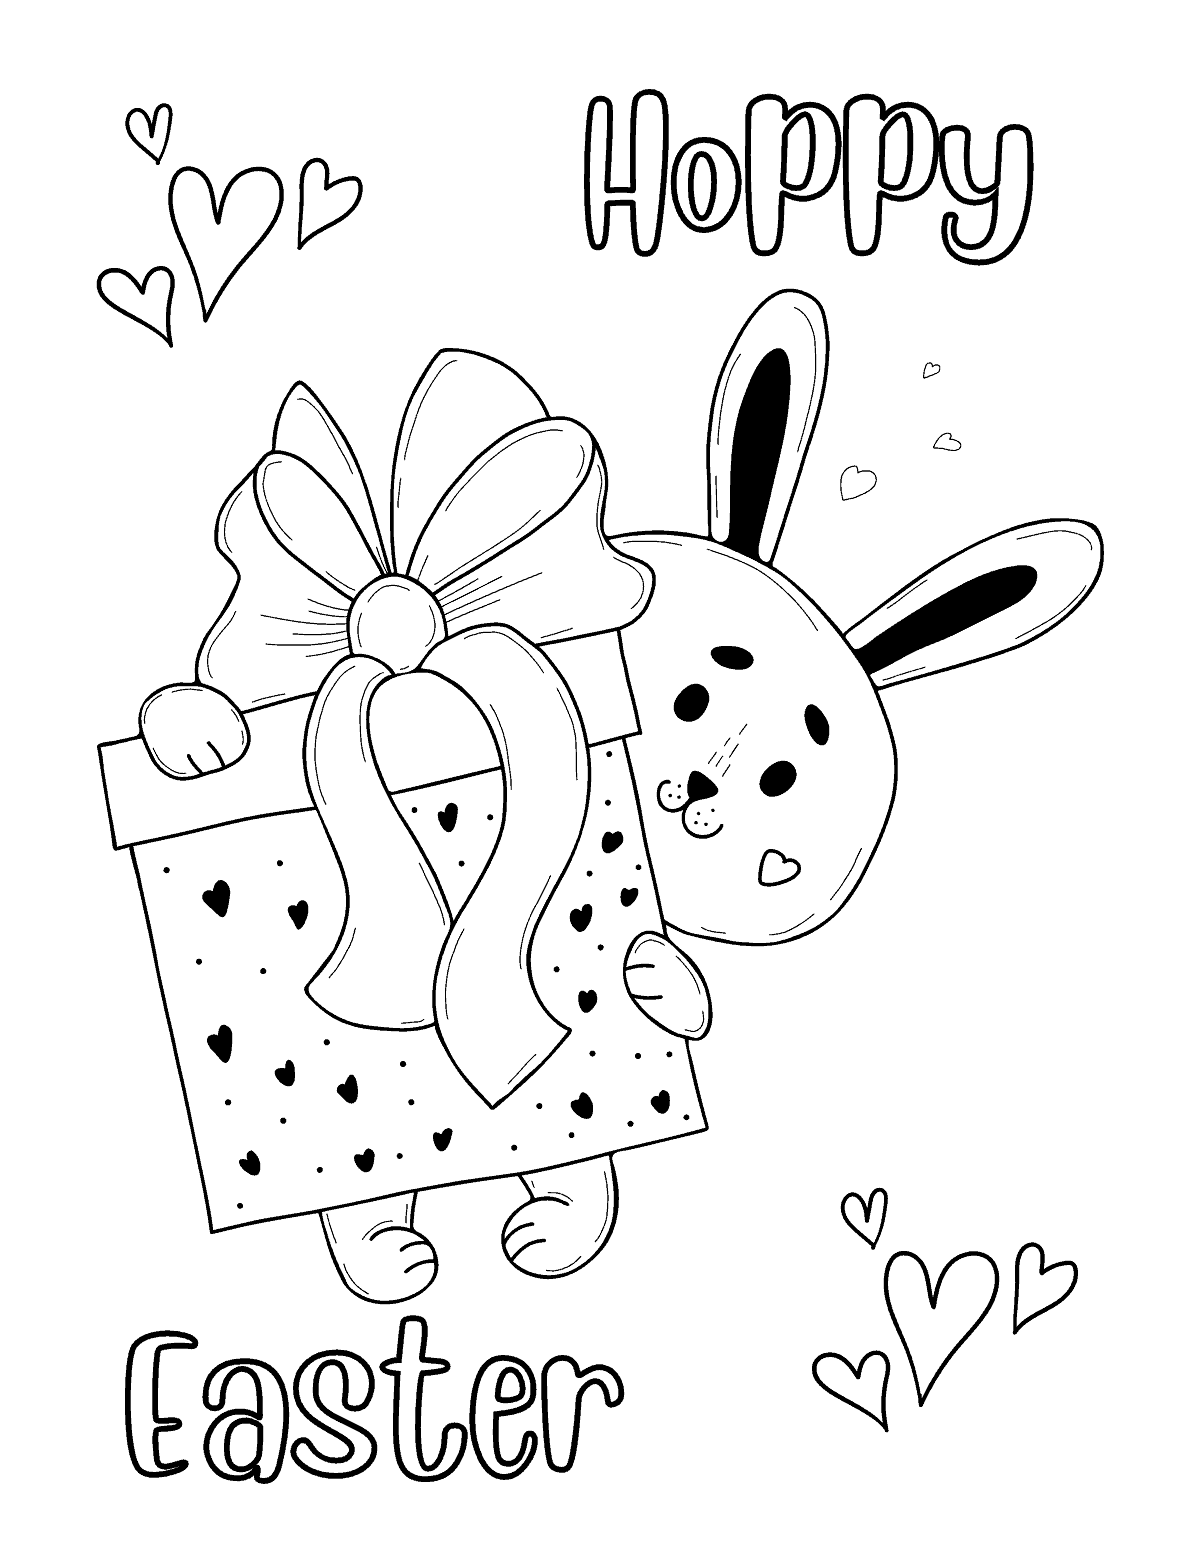 Hoppy Easter Bunny with Gift Coloring Page